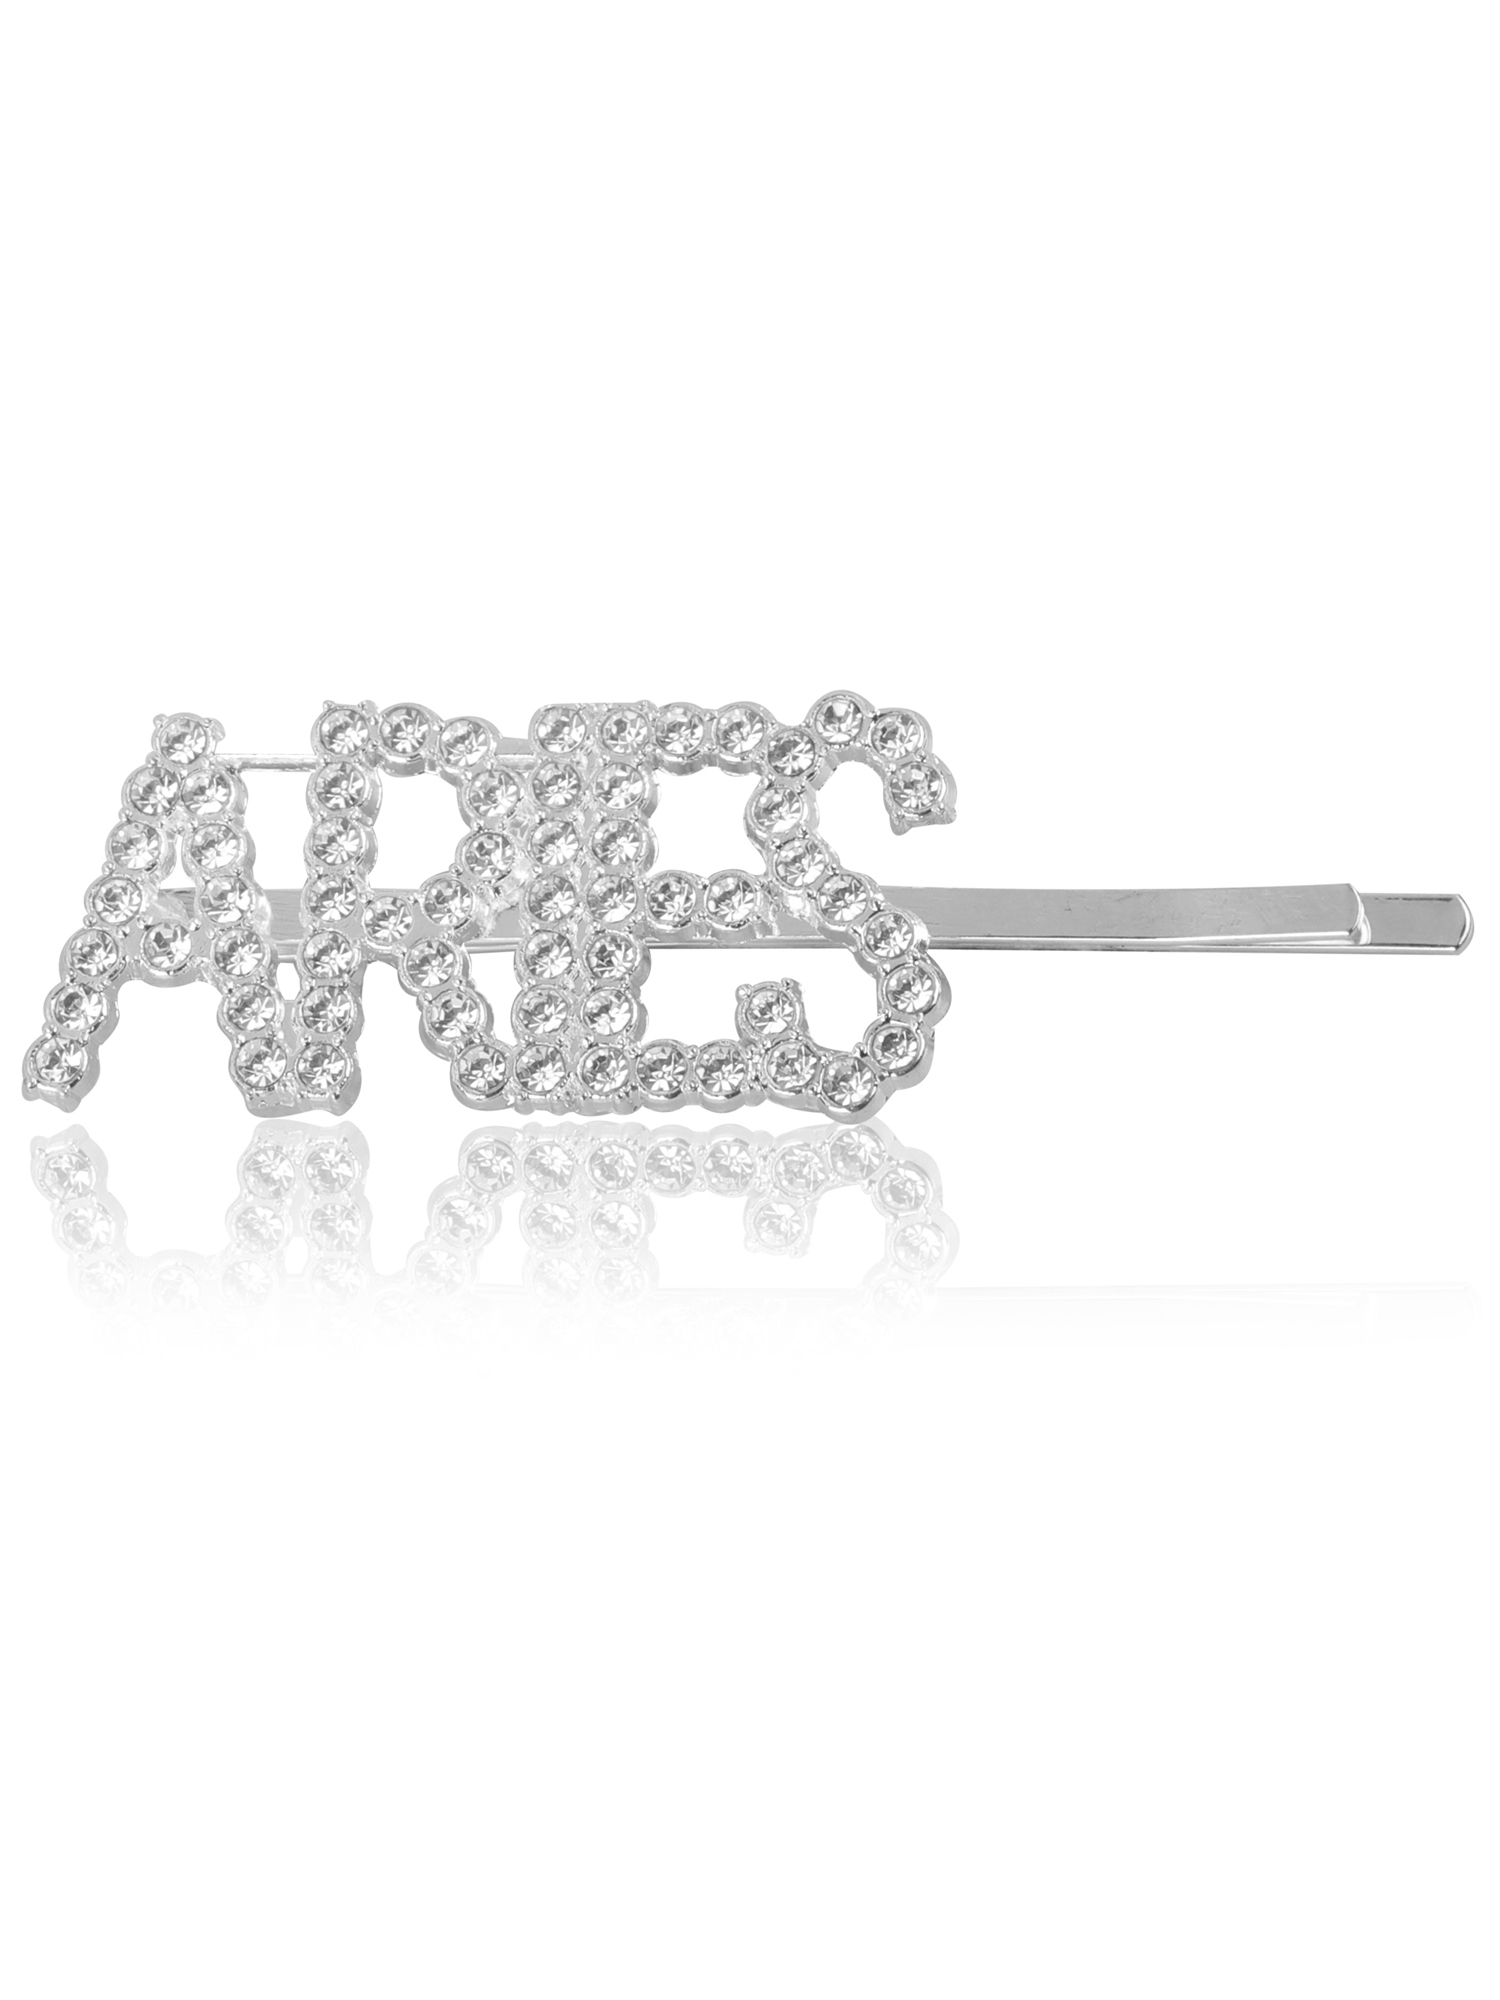 Vembley Attrective Silver Aries Hairclip For Women and Girls